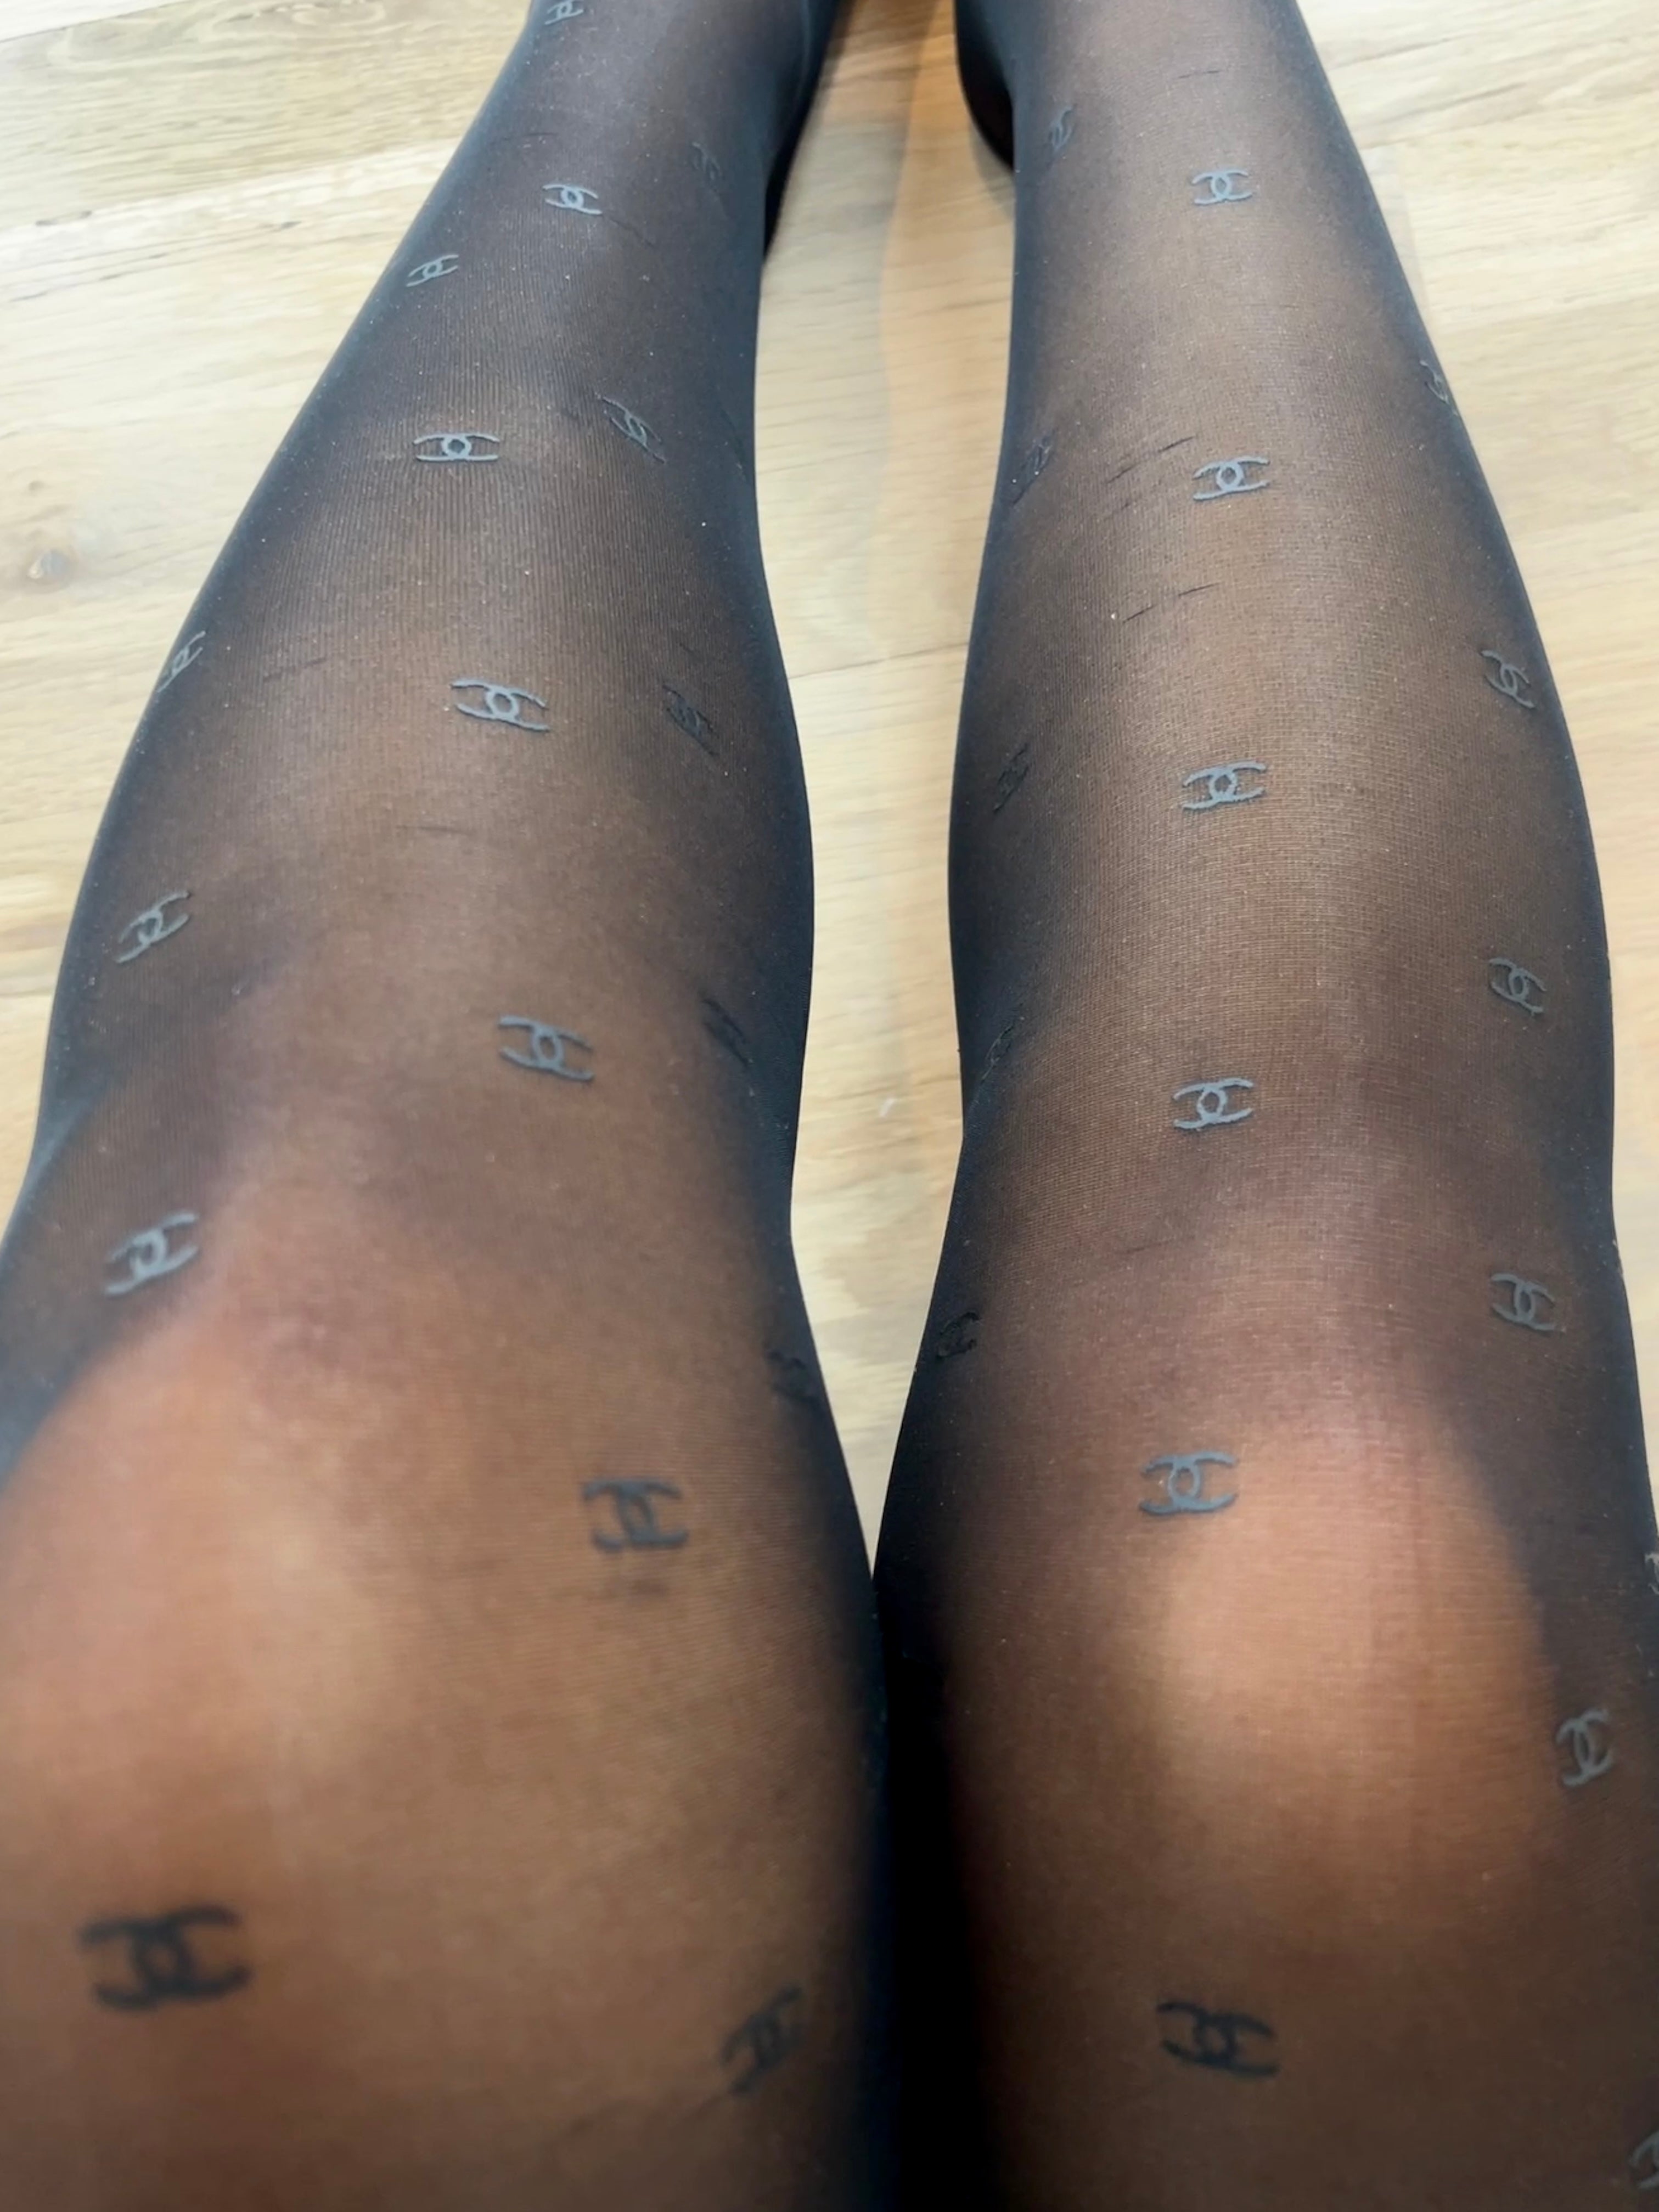 Top 11 Chanel Tights Dupes Better Than Real Chanel Tights!